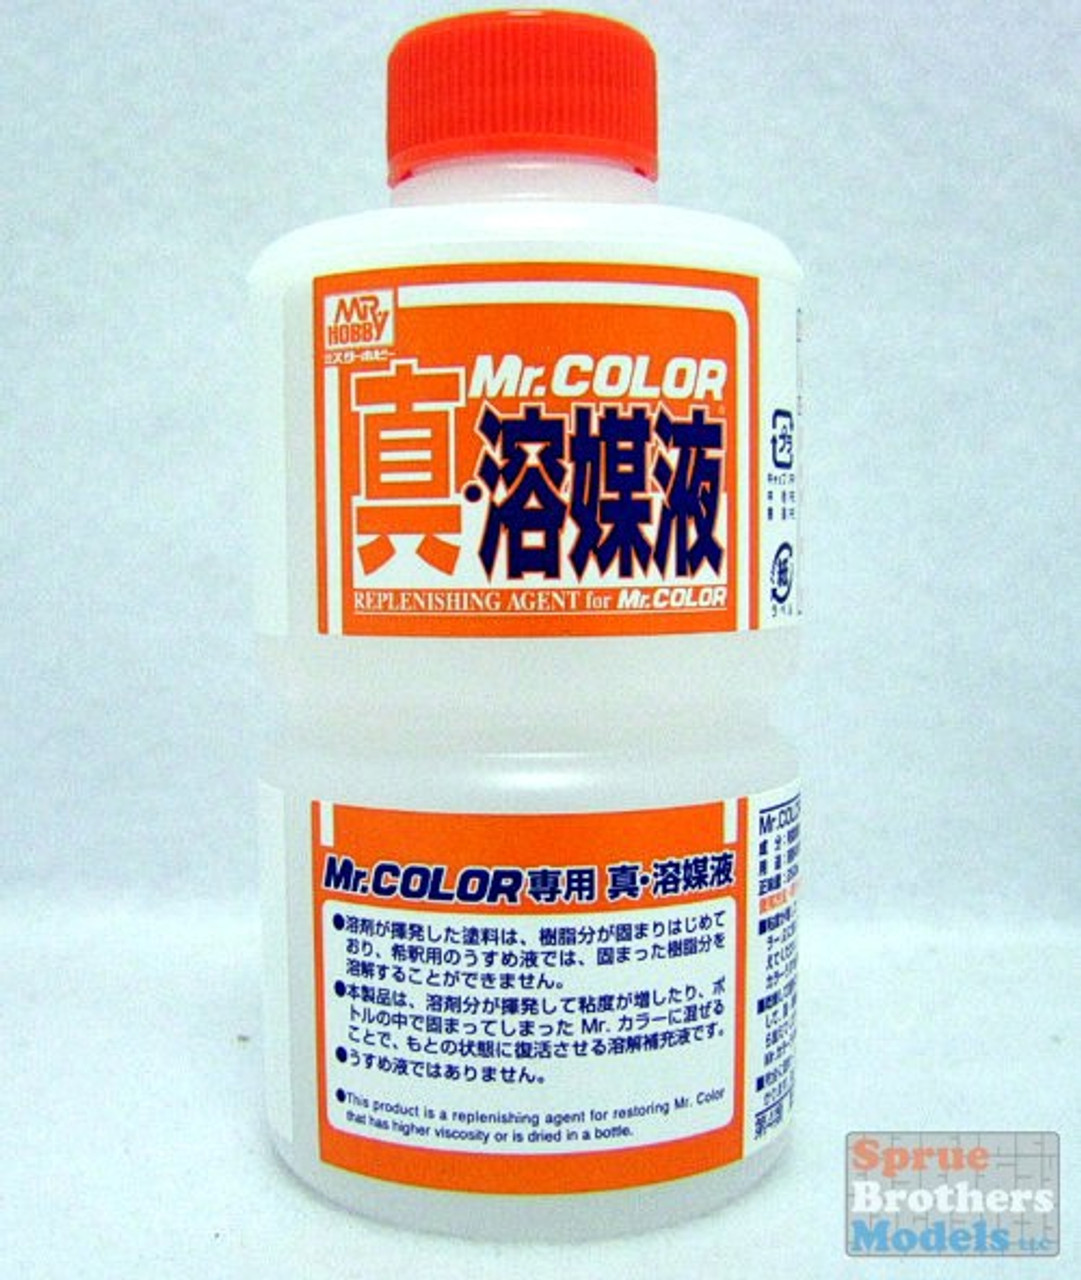 MR. PAINT REMOVER, Mr.COLOR, PAINT / THINNER / SPRAY